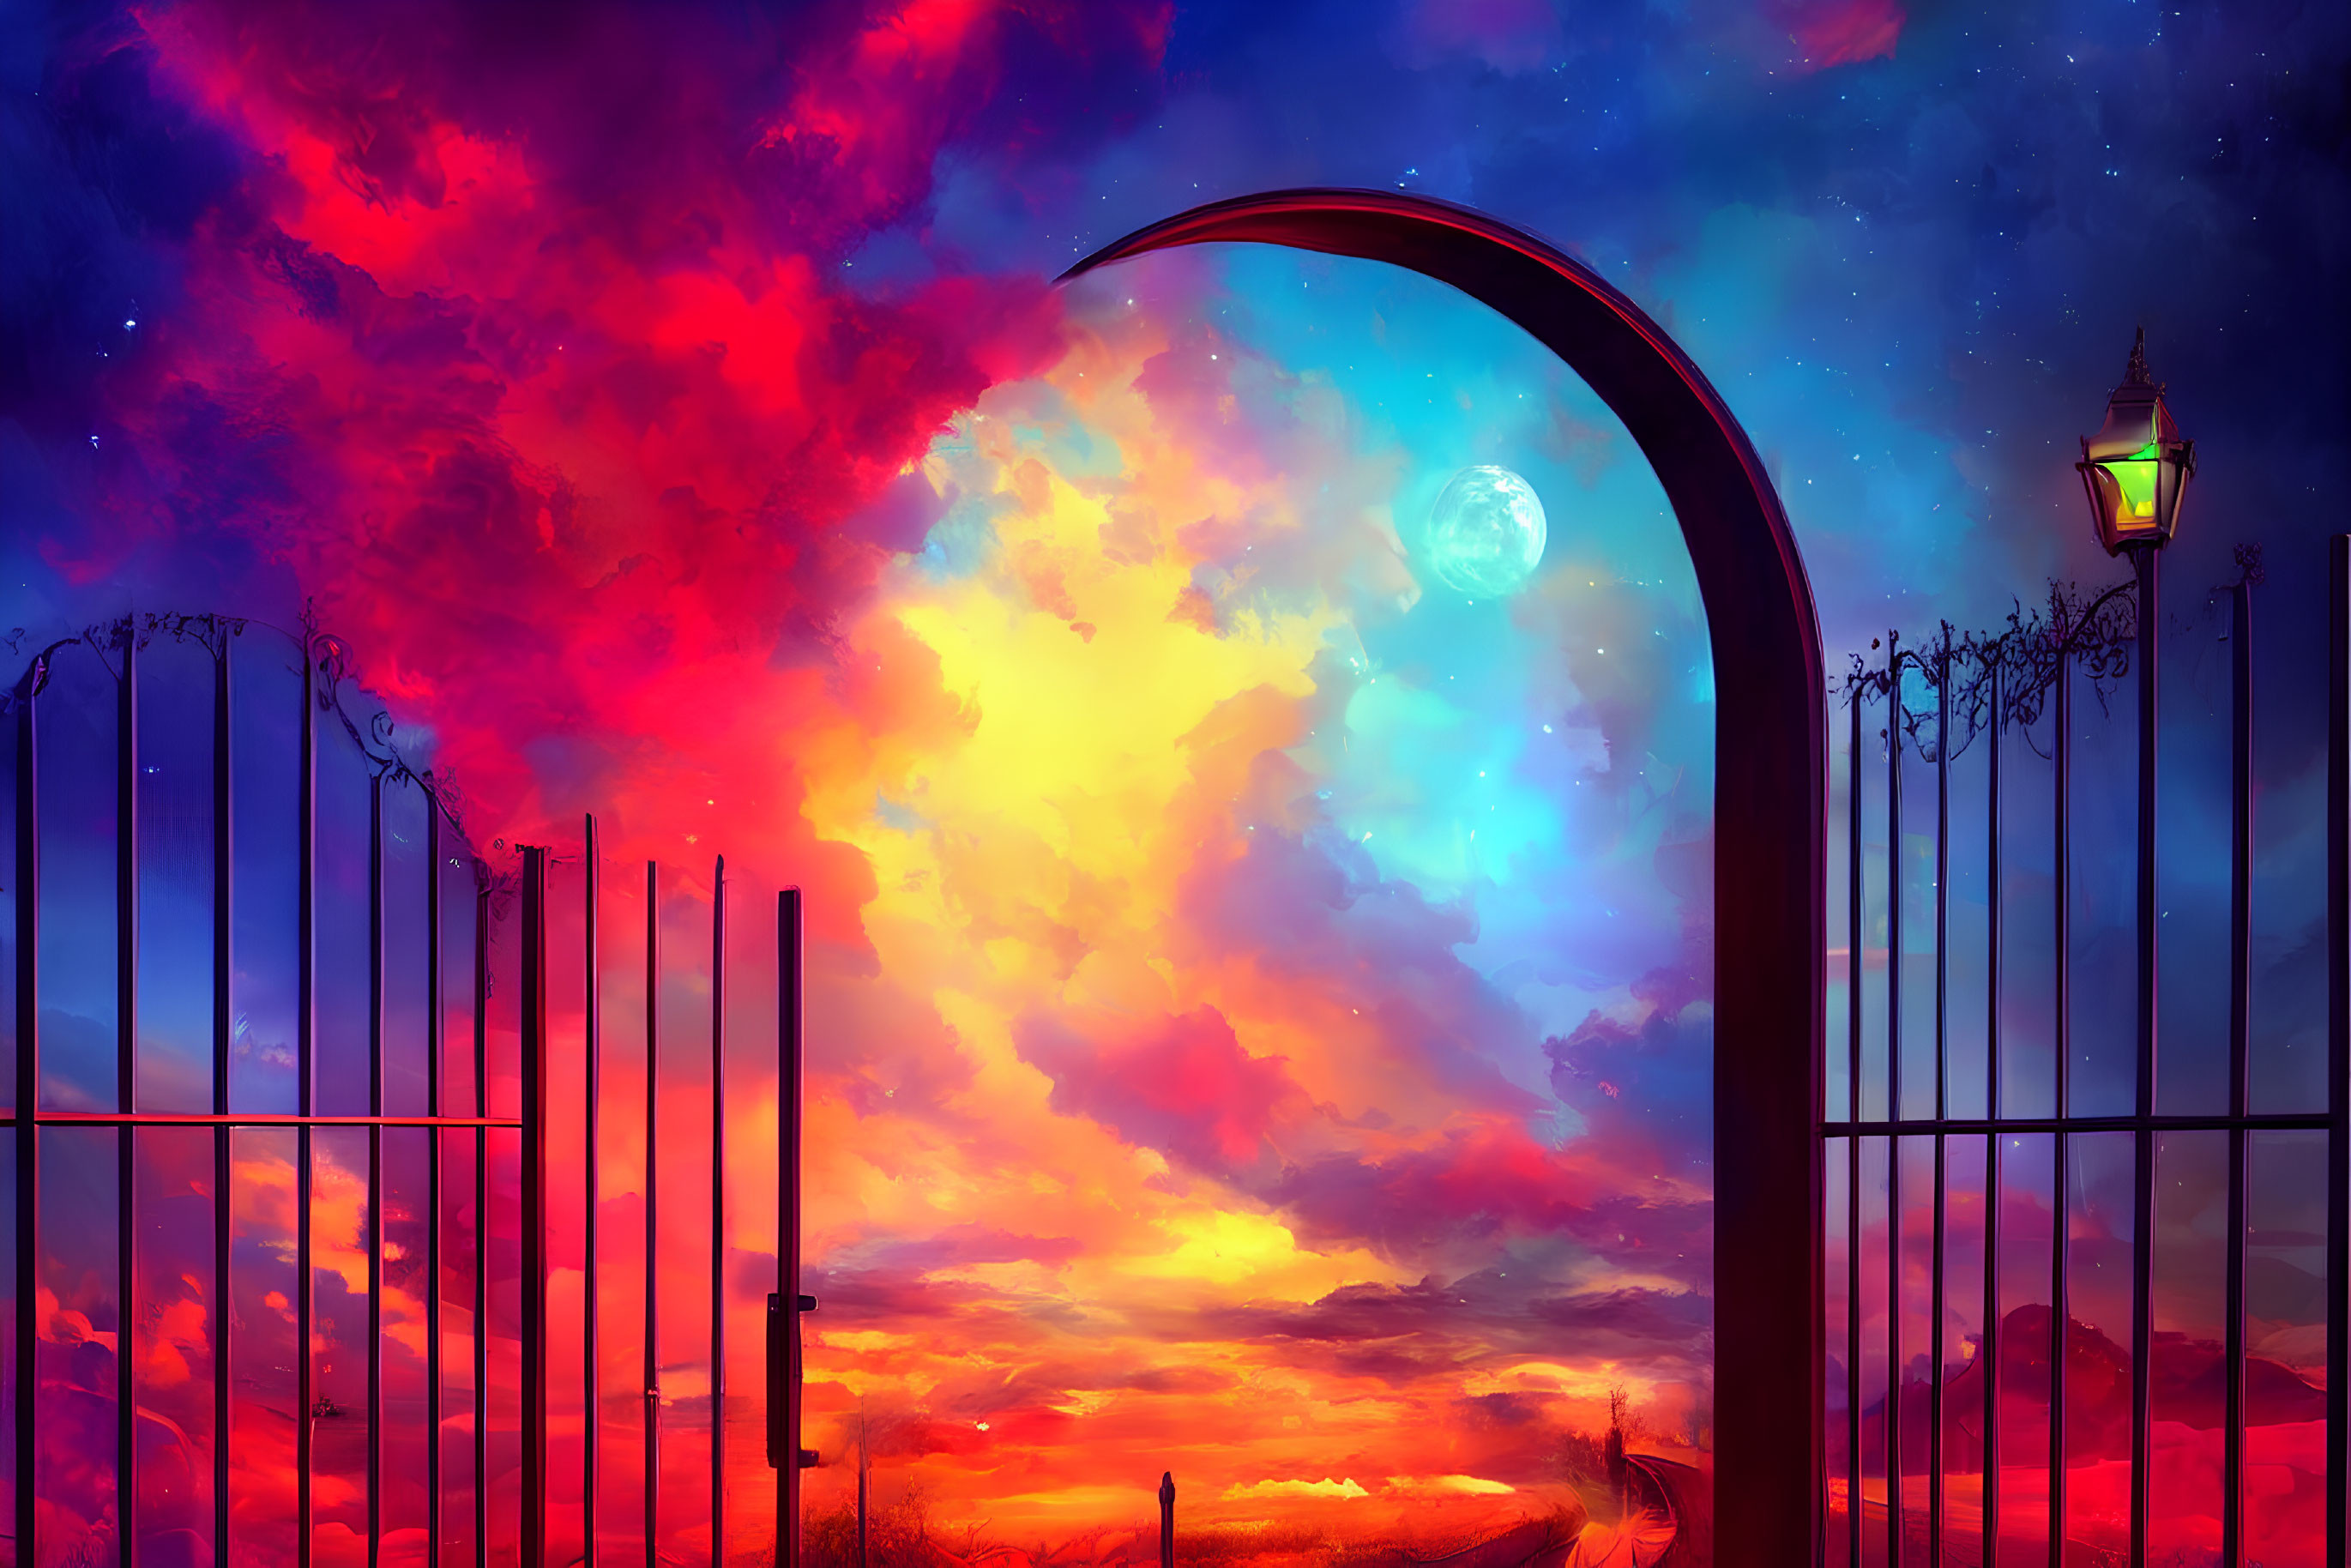 Vibrant sunset sky with open gate, full moon, and lamp post